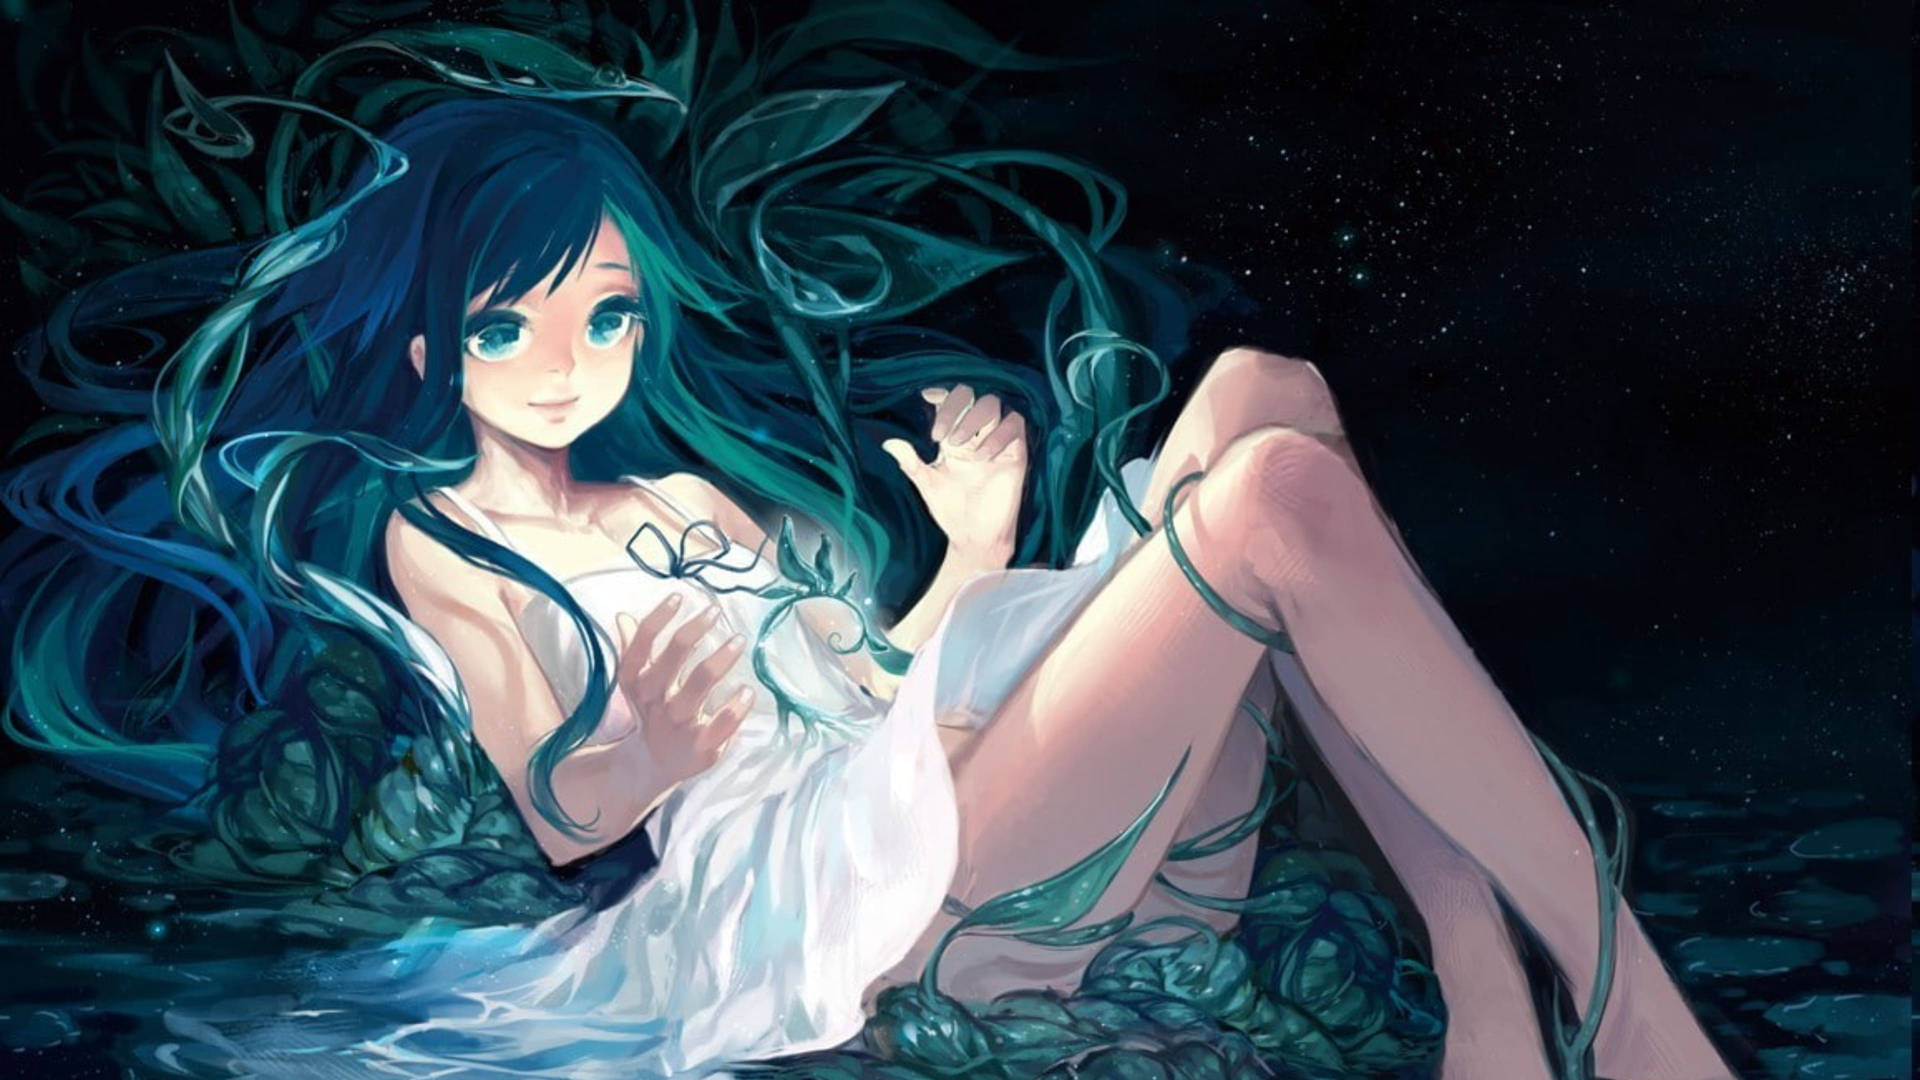 Sexy Anime And Magical Plants Background